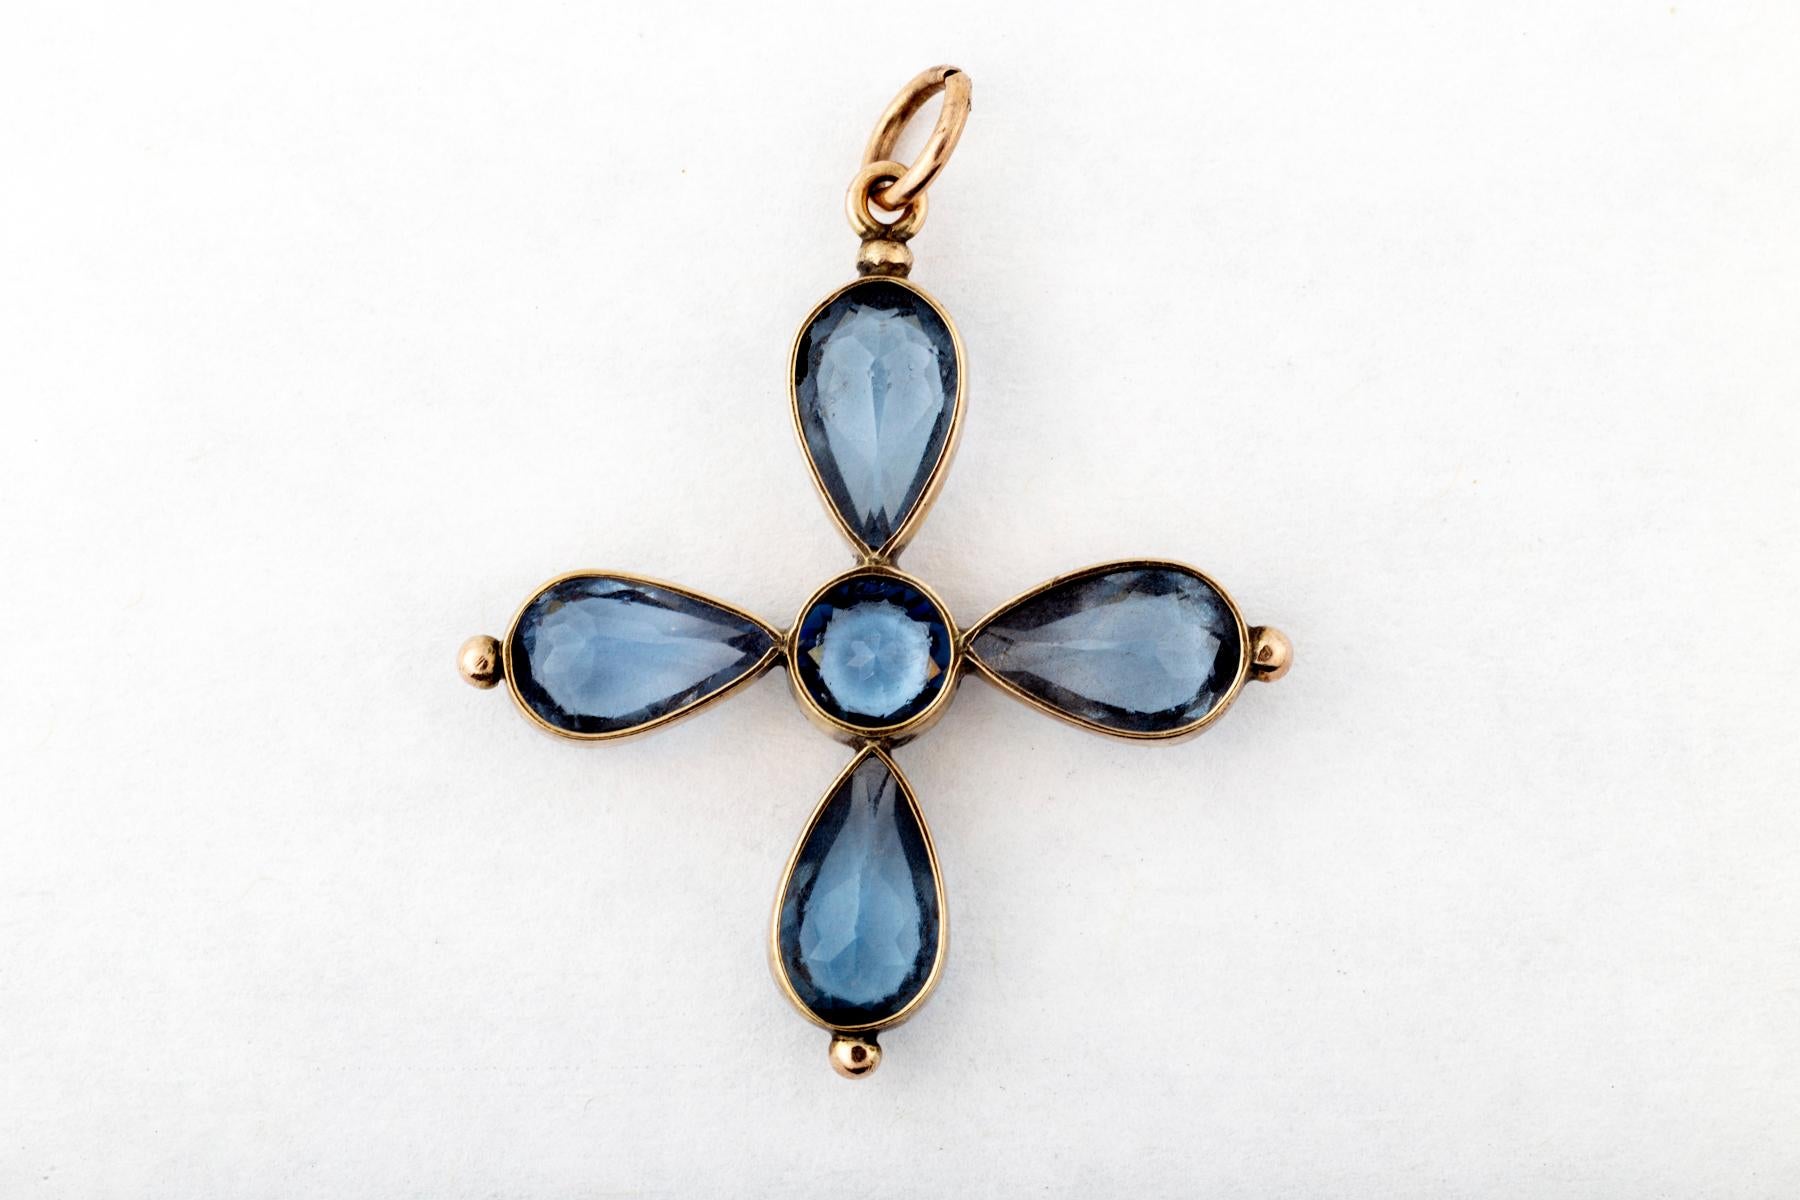 A Victorian Blue paste cross set in 15 kt gold and made in England c. 1870. The various colors of antique paste can be breathtaking. The setting of these stones is open backed allowing al light to celebrate the cornflower blue color. Brilliant blue